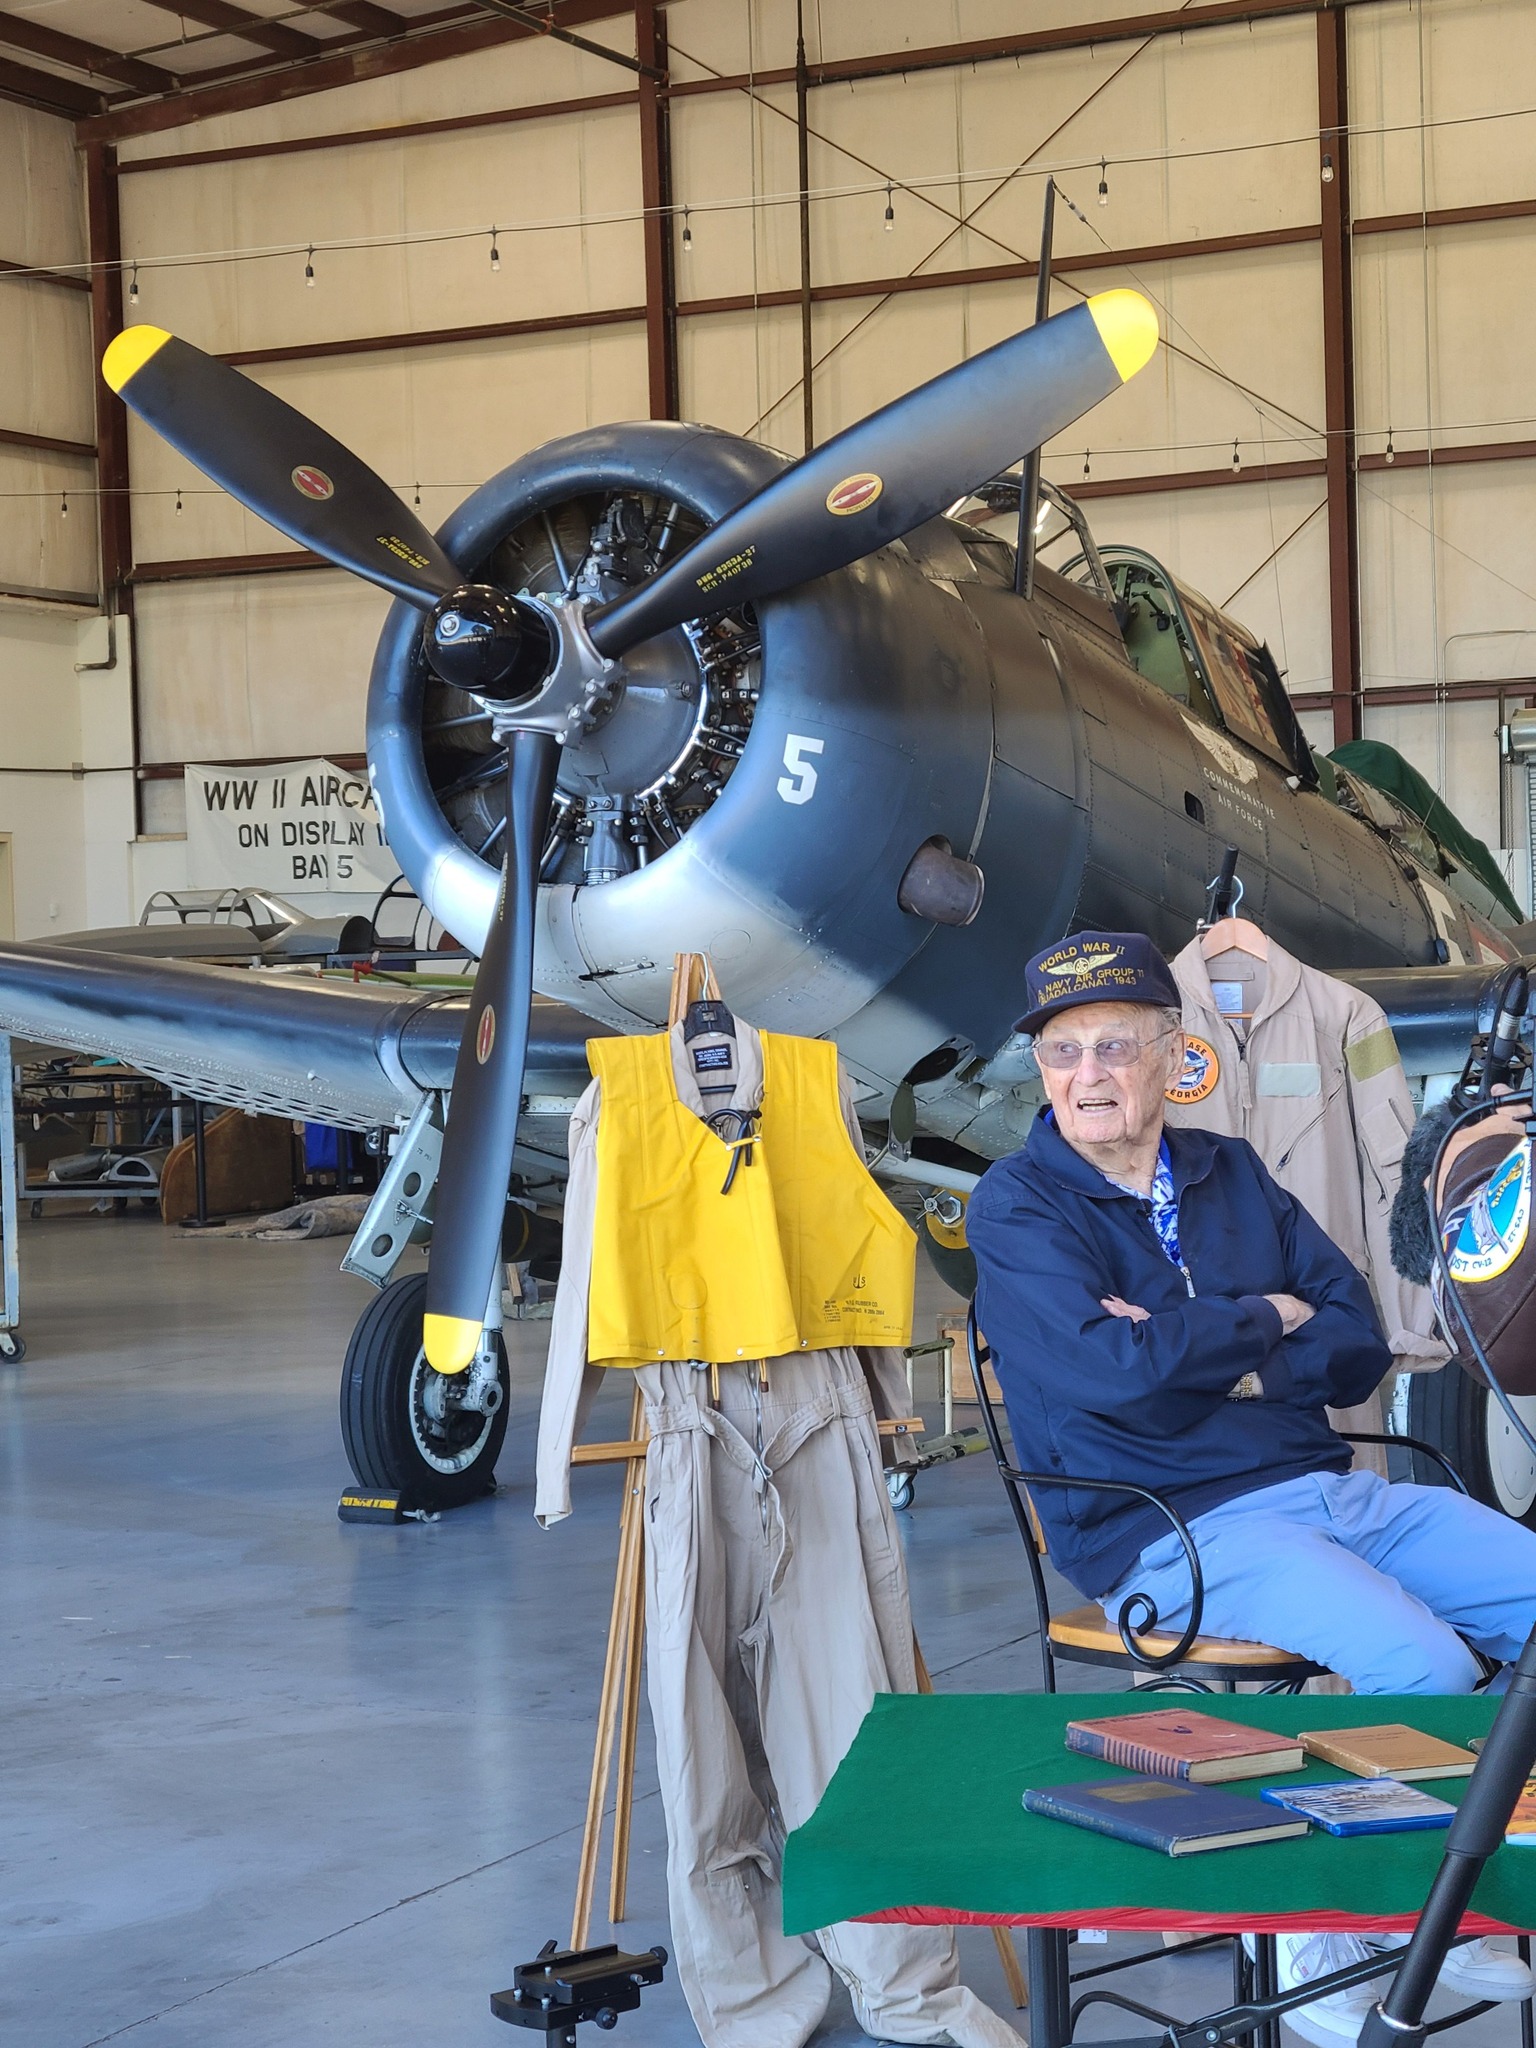 WWII veteran gunner Dick Miralles relives his wartime flying in a restored SBD Dauntless dive bomber 80 years after he fought in the war. photo courtesy of Angela Decker